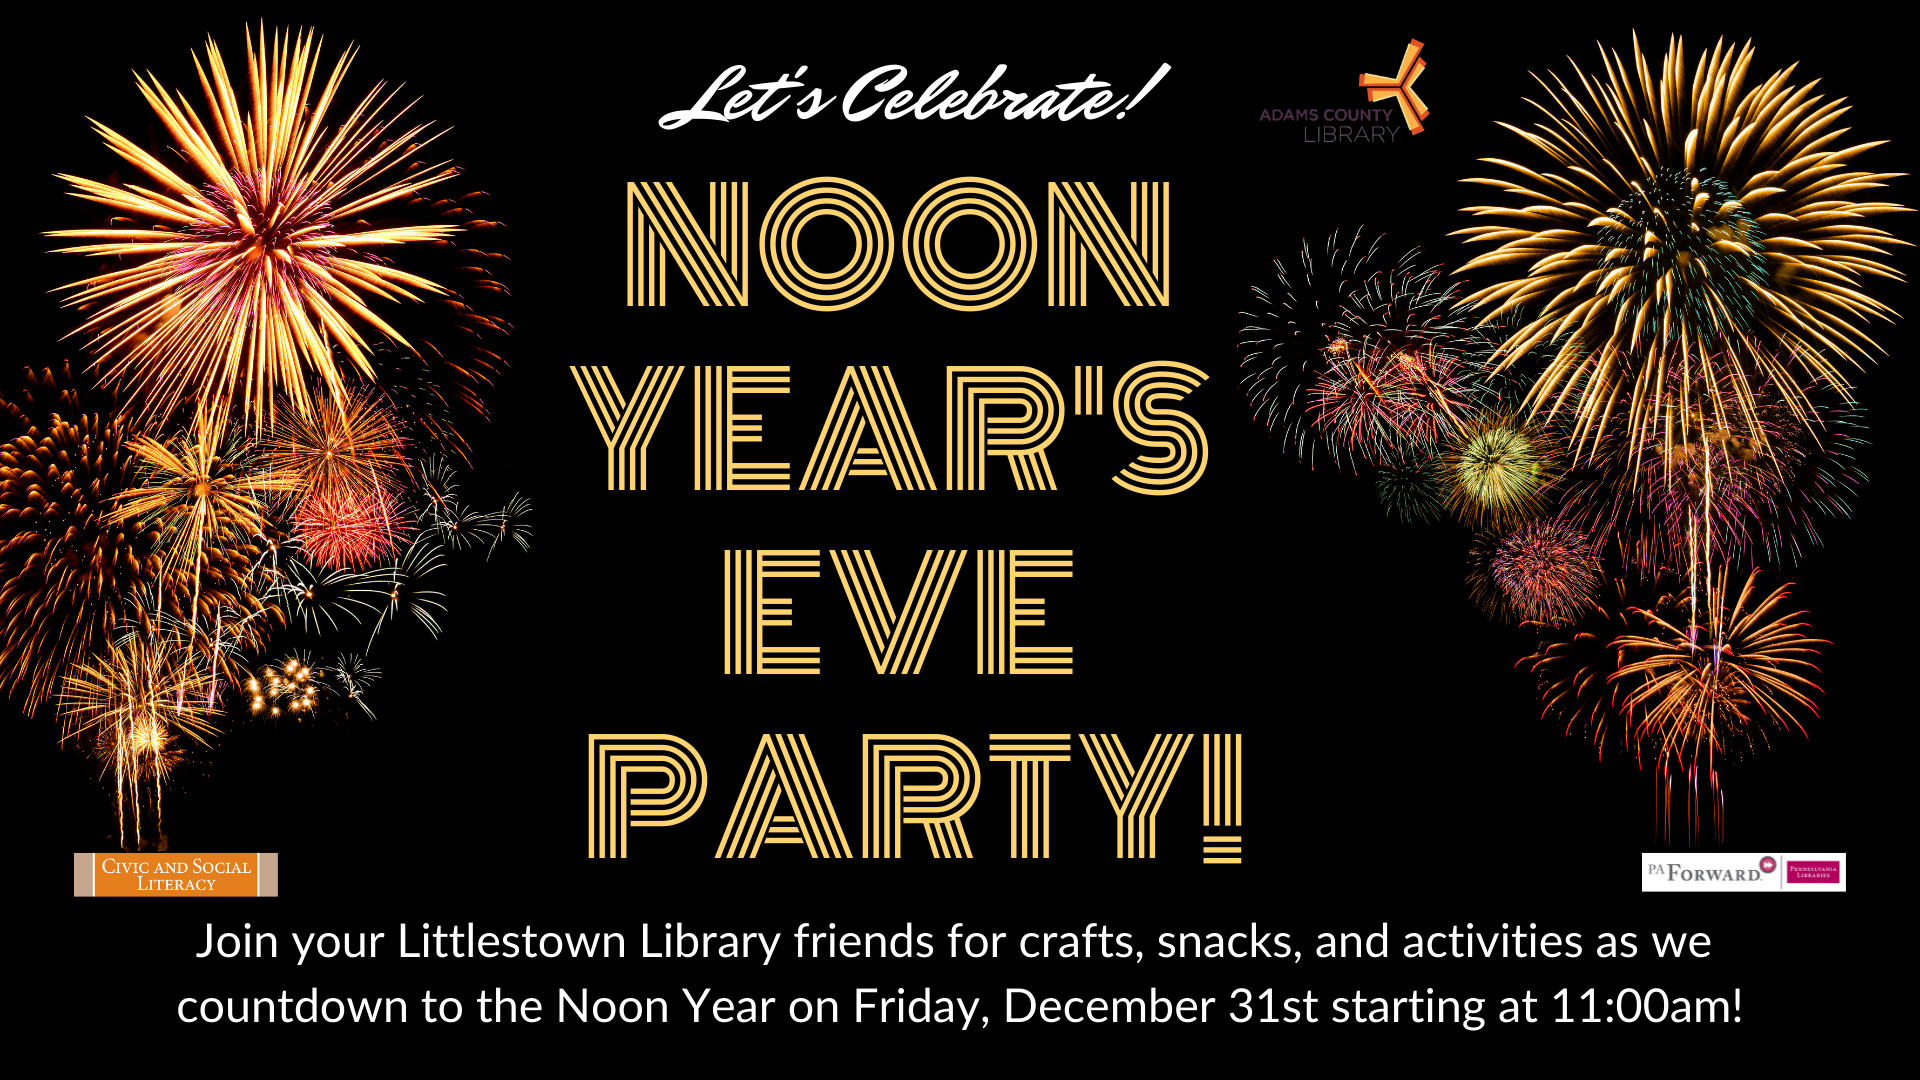 Join us on Friday, December 31, 2021 at 11:00am for our Noon Year's Eve Celebration!